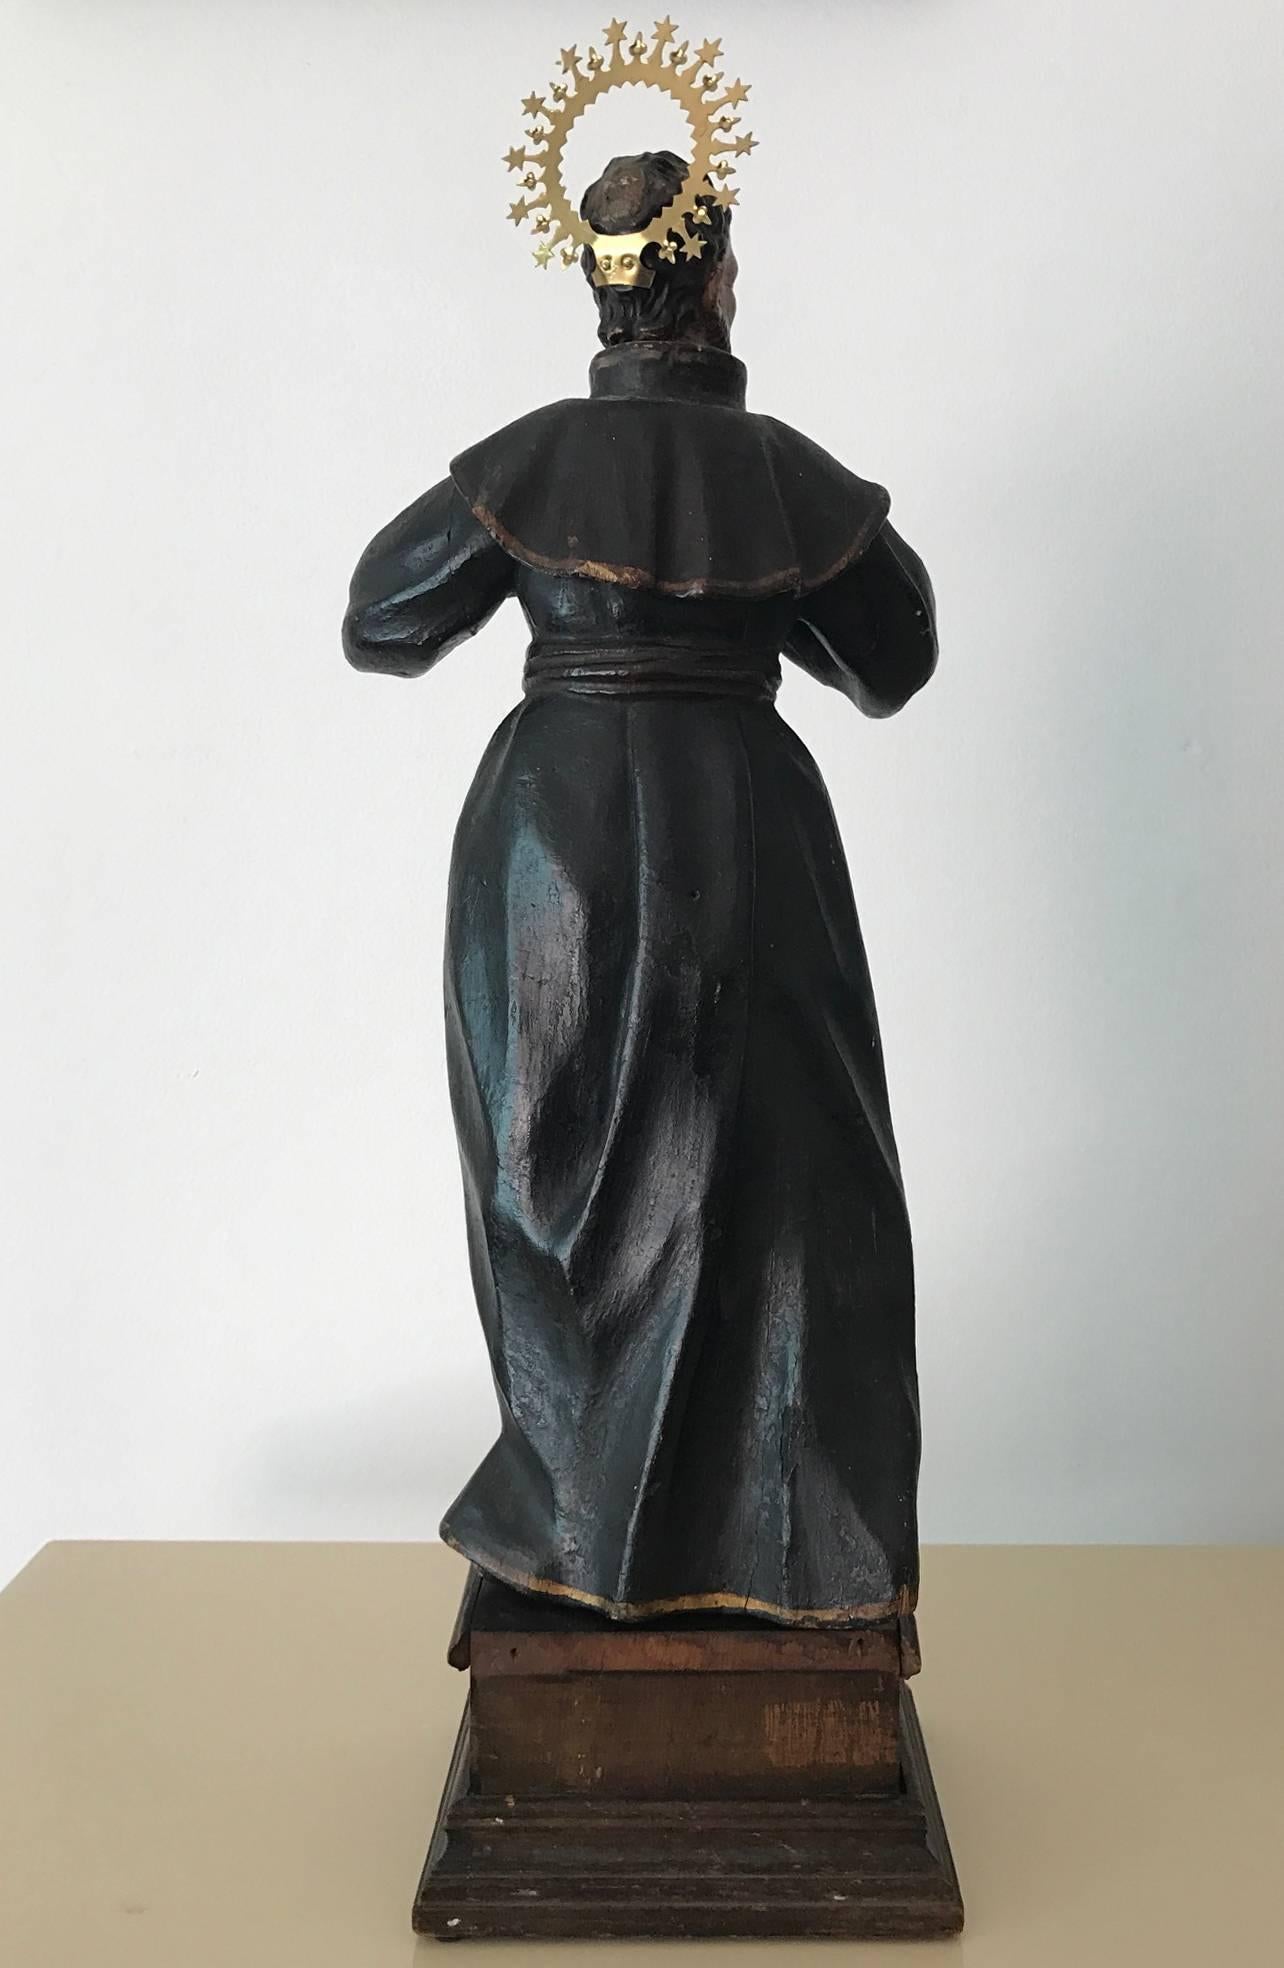 A well carved wood Santo from Spanish Colonial period circa 19th century, likely Mexico in origin. It depicts a saint in flowing black robe who rips it open to reveal its bare chest. sectional construction with head and hands carved separately in